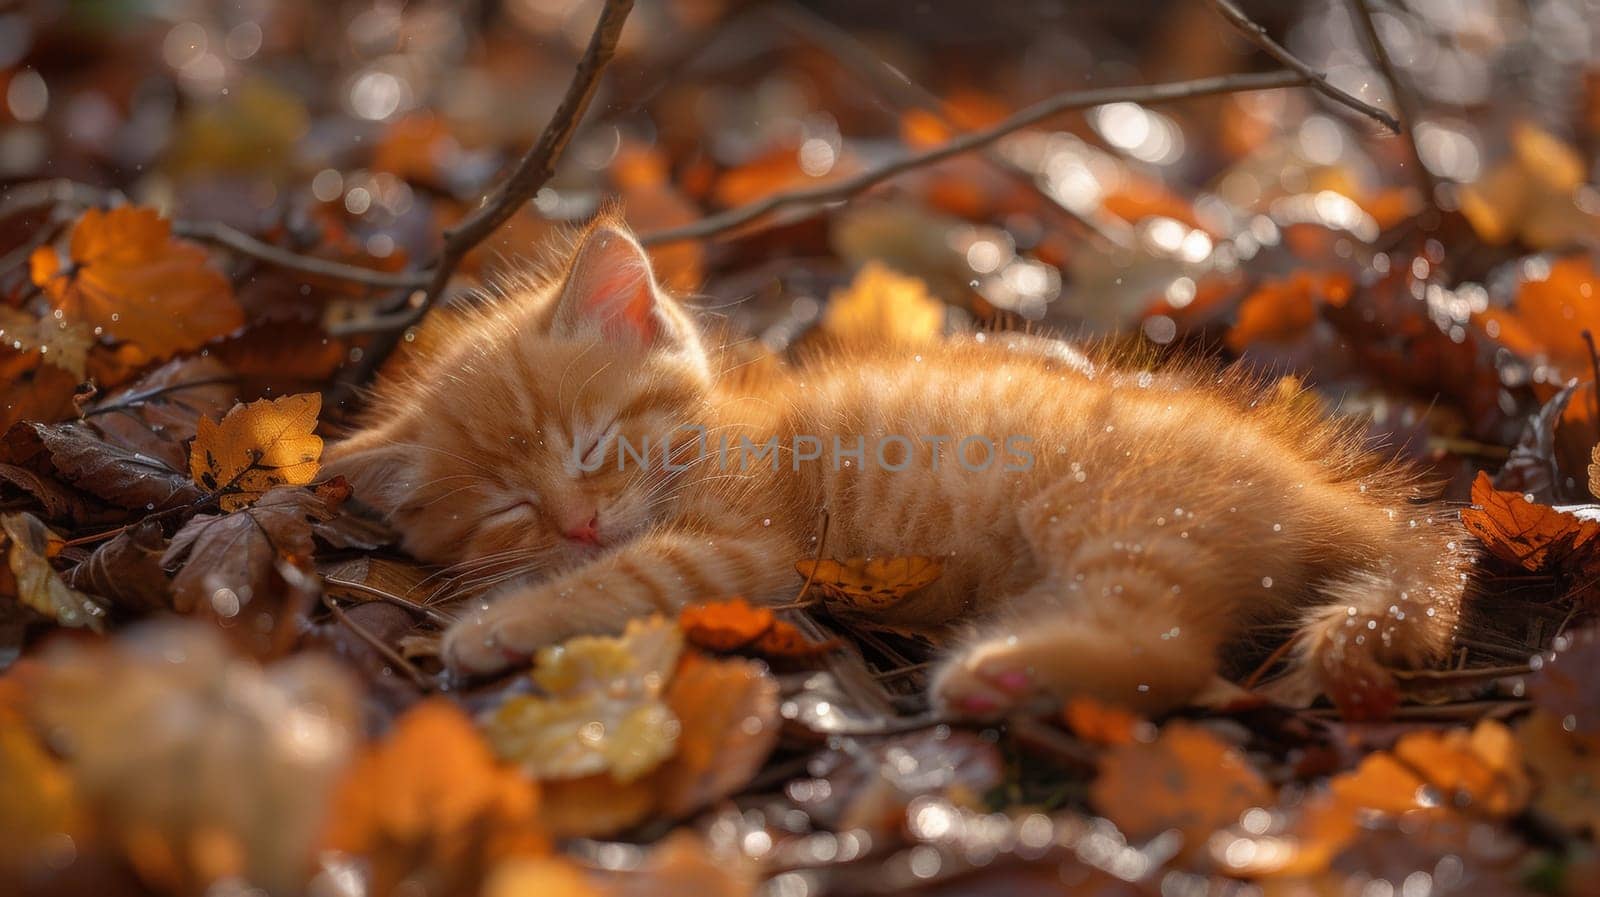 A small kitten sleeping in a pile of leaves on the ground